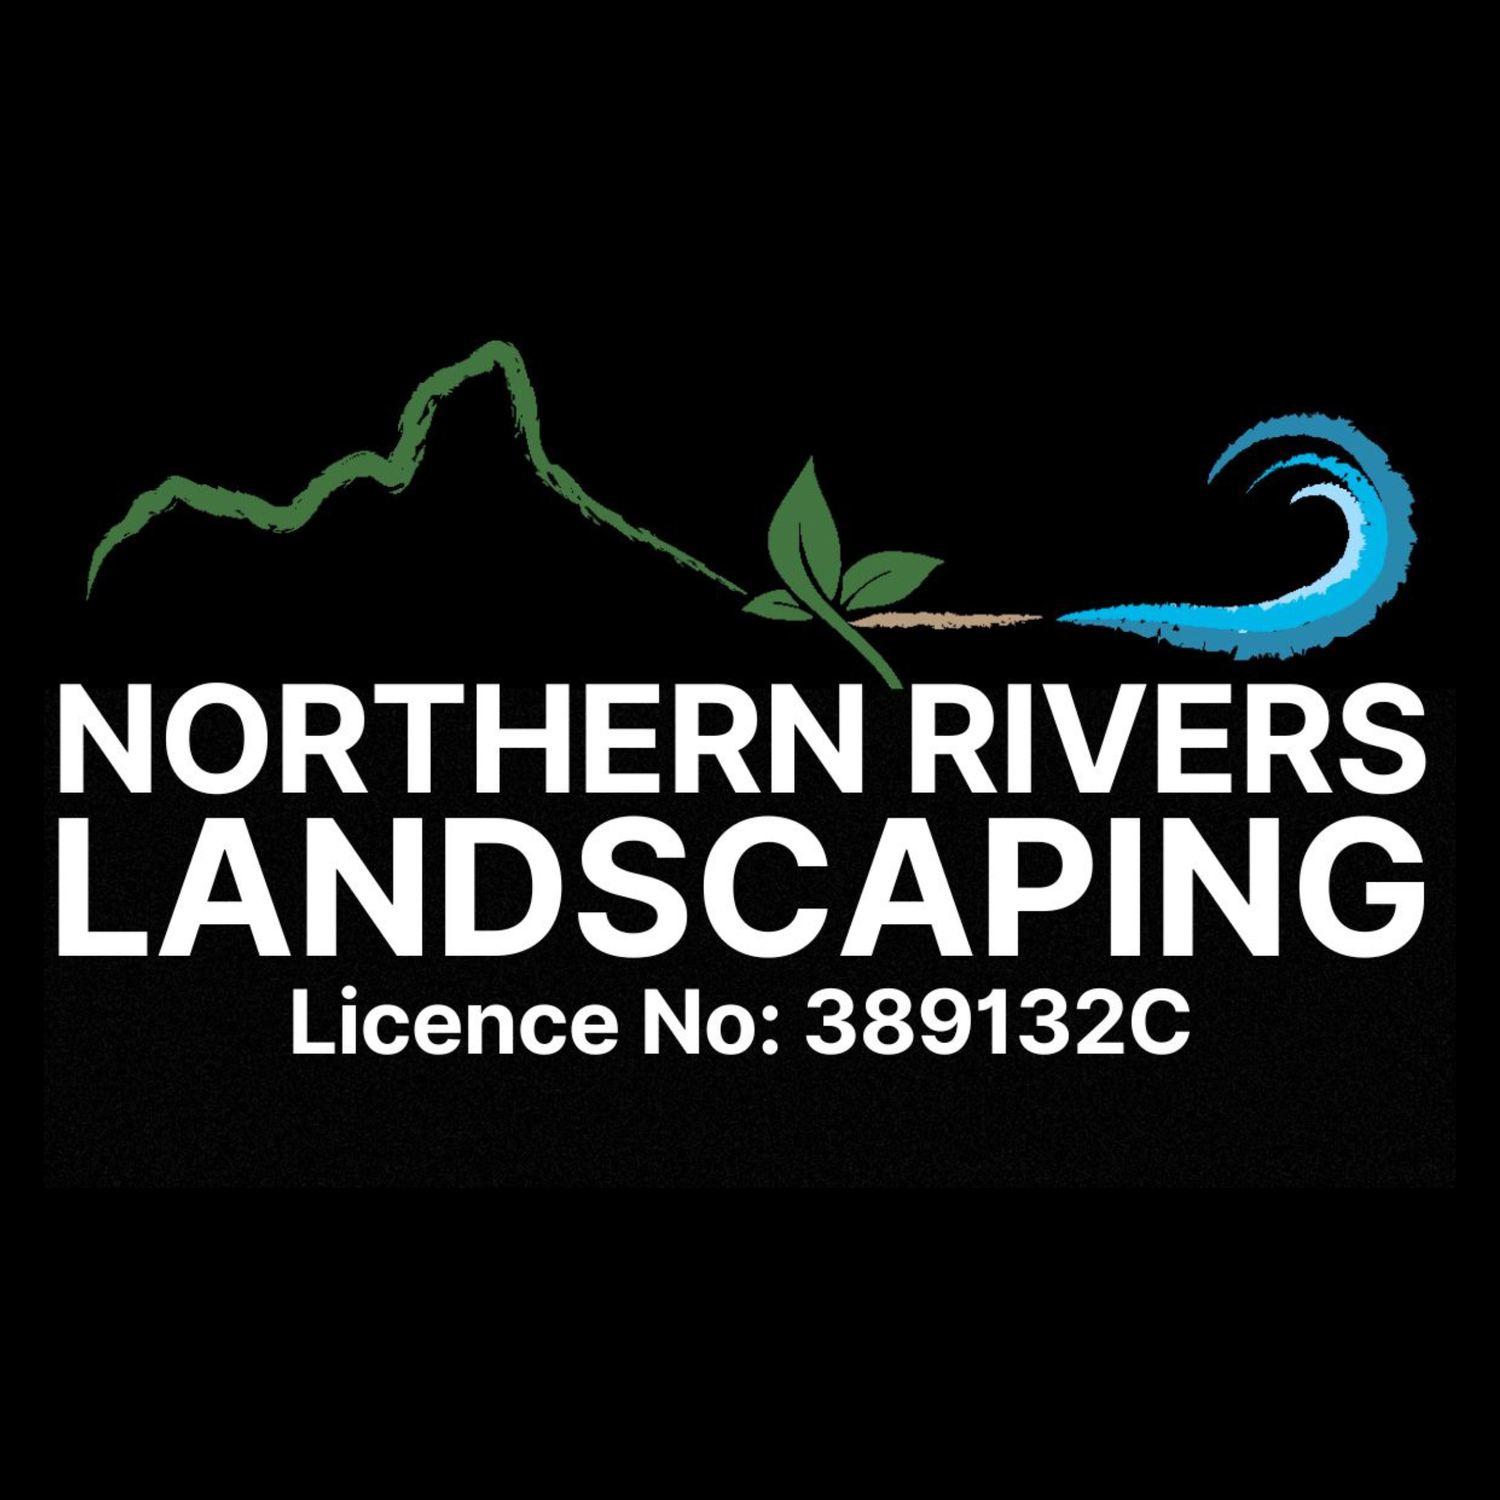 Northern Rivers Landscaping